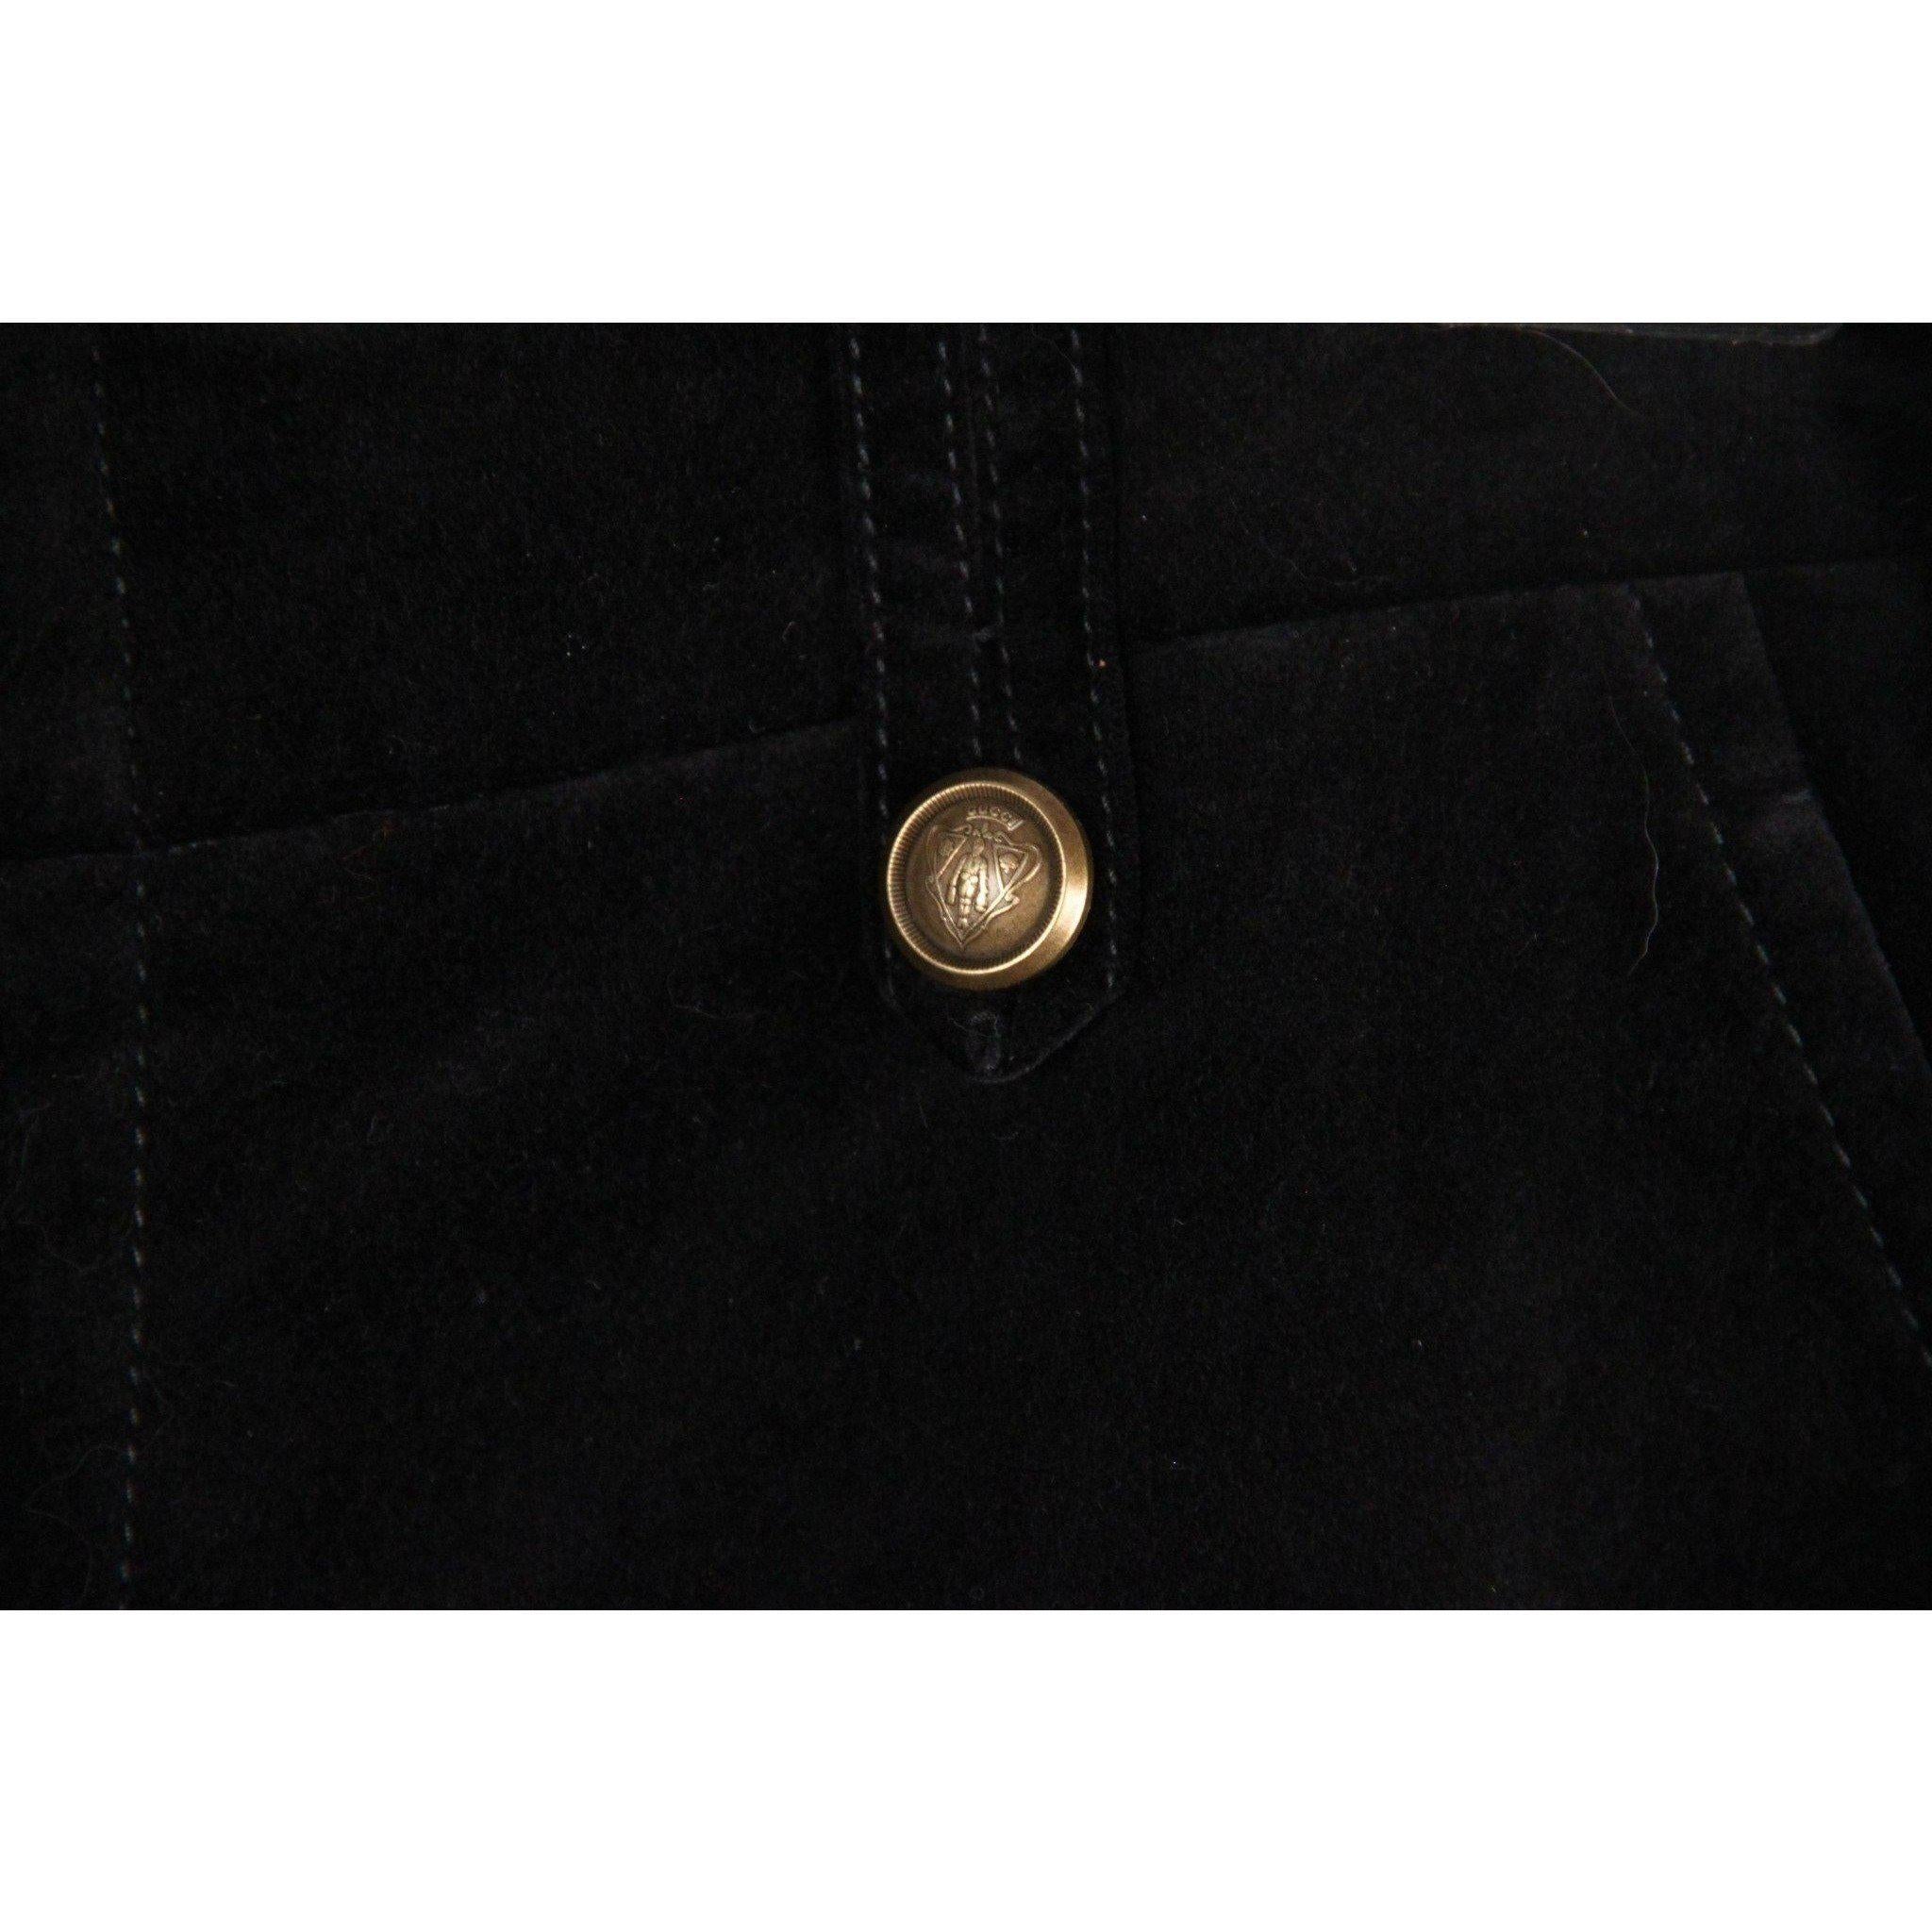 - Gucci velvet trousers - Black color - Front pockets & side pockets - Front zip & hook-and-bar closure - Belt loops - GUCCI crest buttons - Size : 40 IT(The size shown for this item is the size indicated by the designer on the label). It should